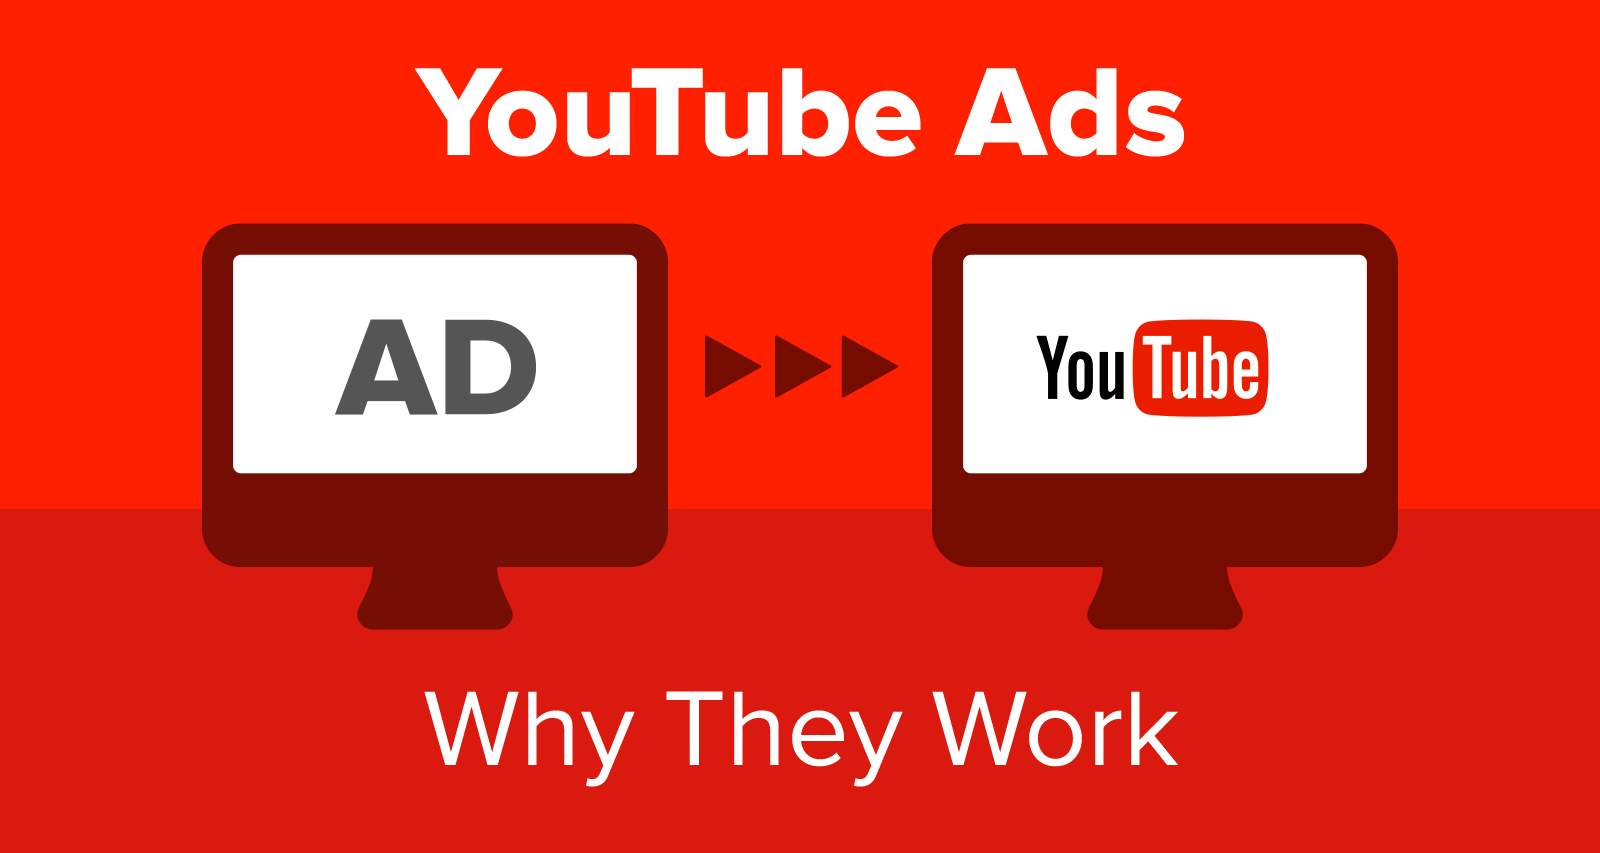 Grow Your Business With YouTube Ads